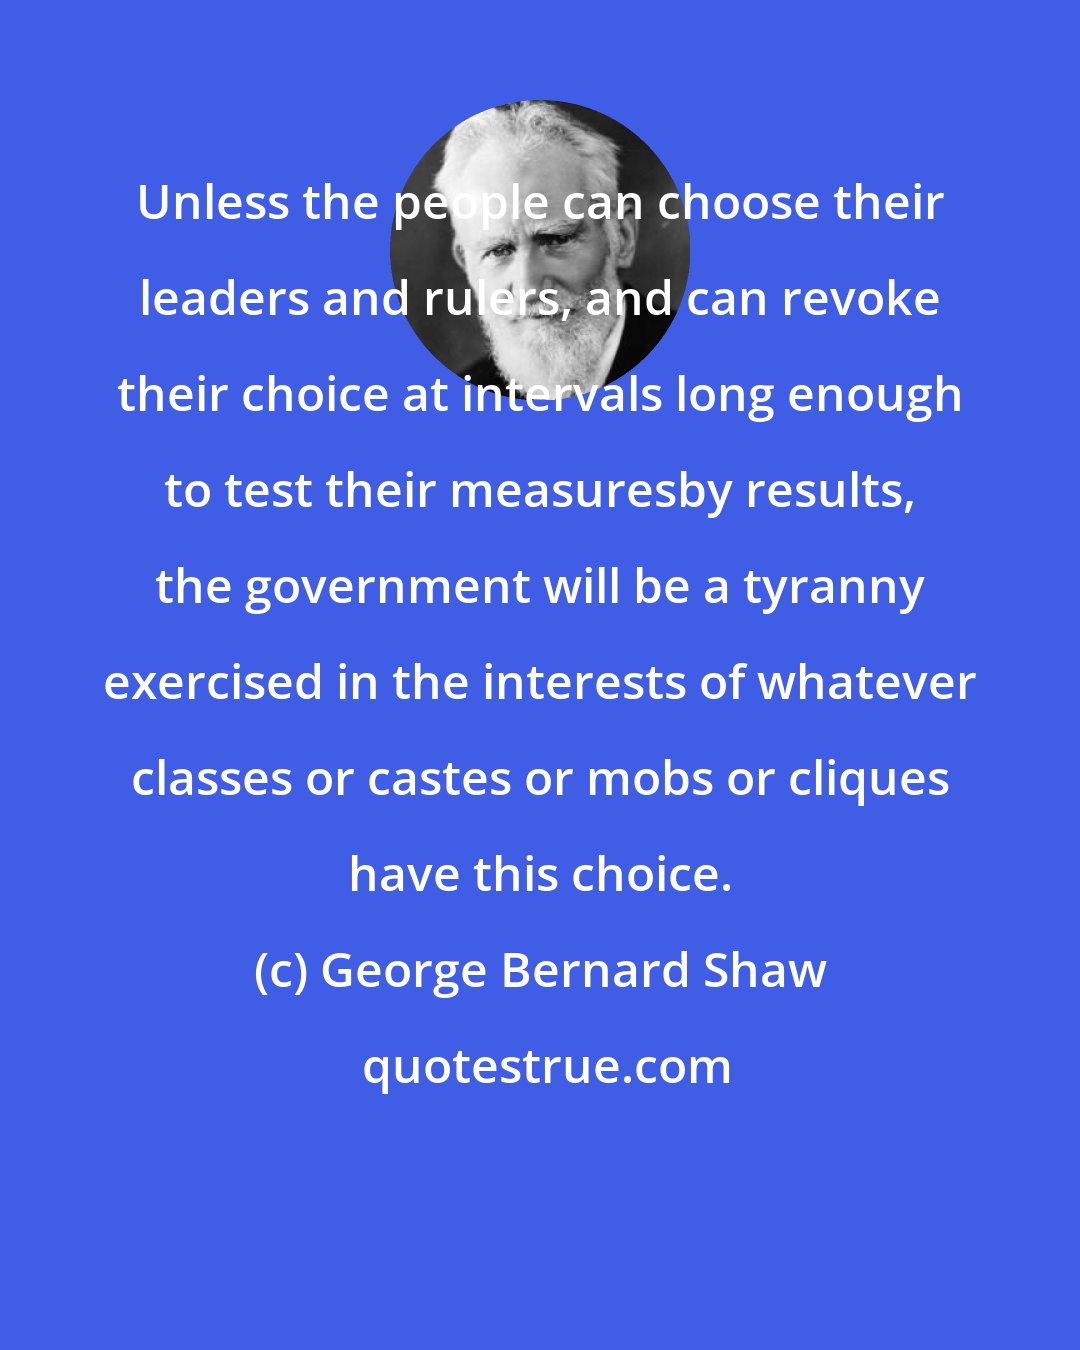 George Bernard Shaw: Unless the people can choose their leaders and rulers, and can revoke their choice at intervals long enough to test their measuresby results, the government will be a tyranny exercised in the interests of whatever classes or castes or mobs or cliques have this choice.